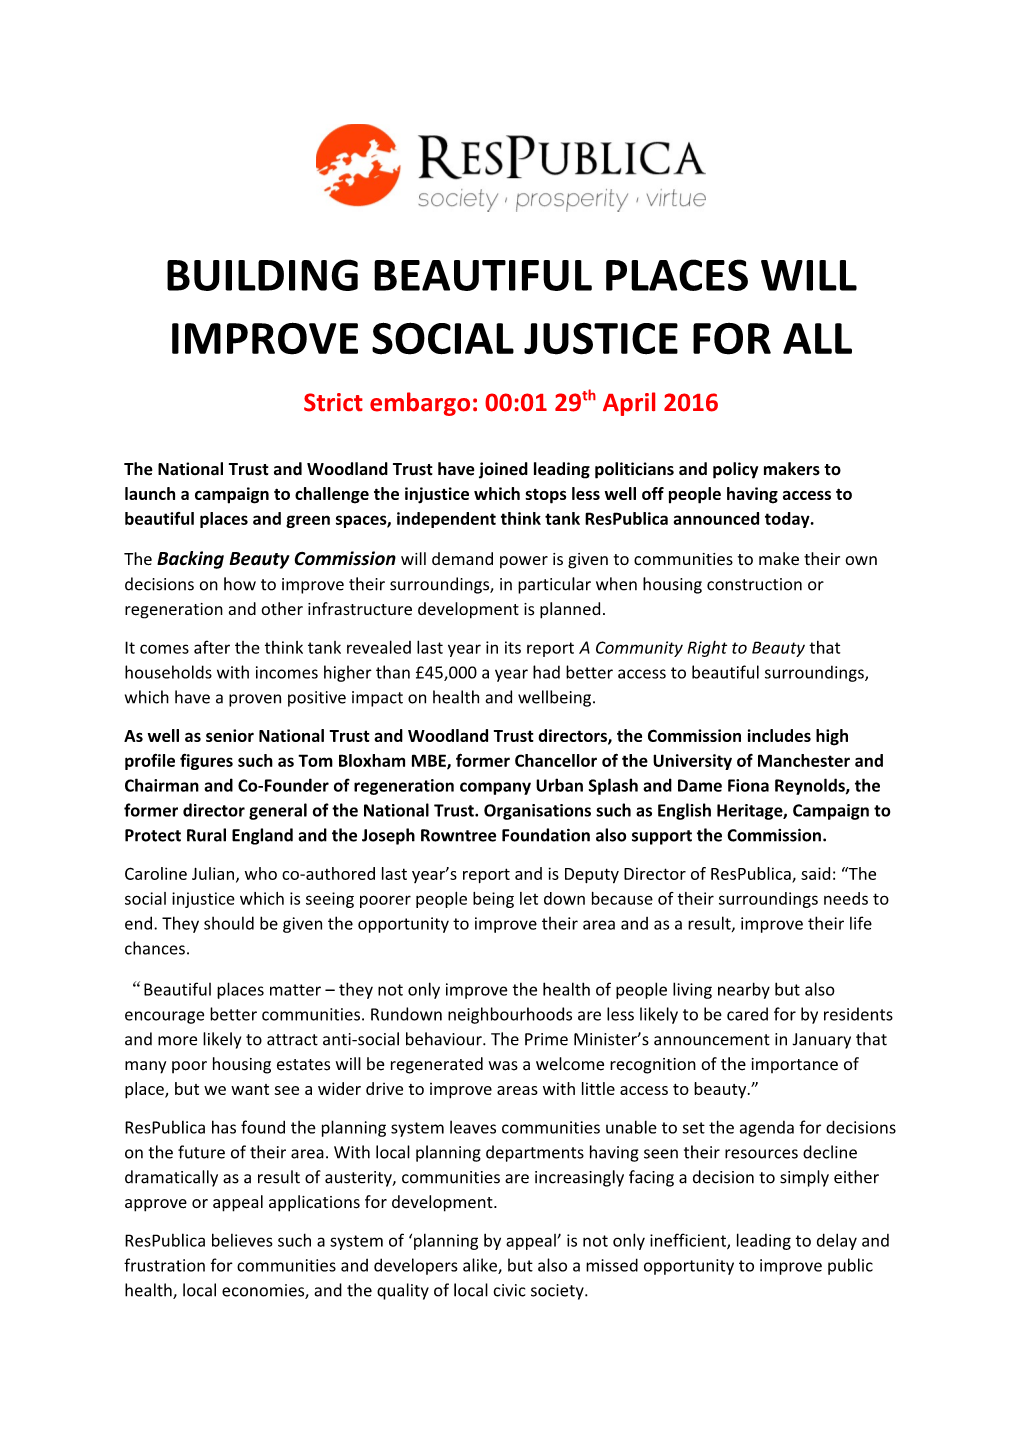 Building Beautiful Places Will Improve Social Justice for All